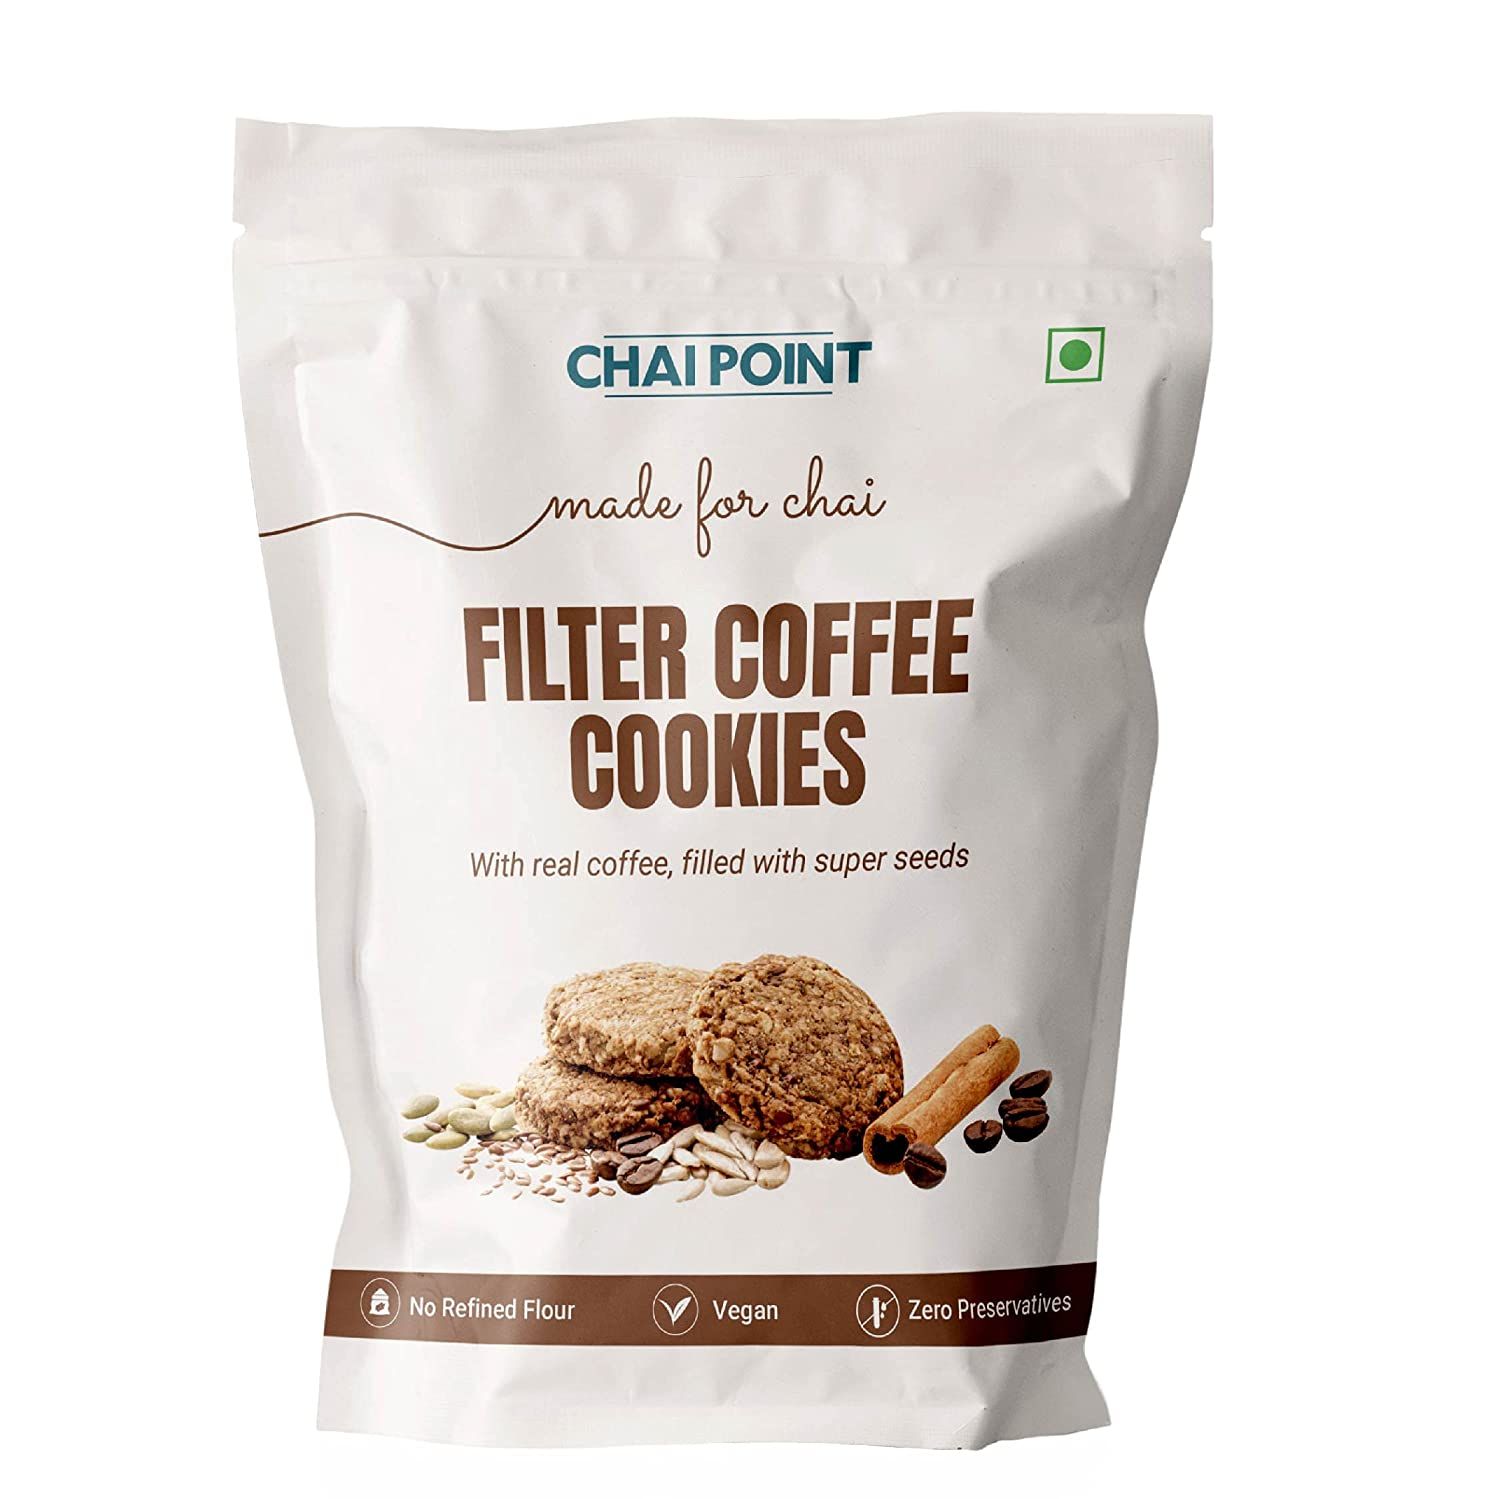 Chai Point Filter Coffee Cookies Image